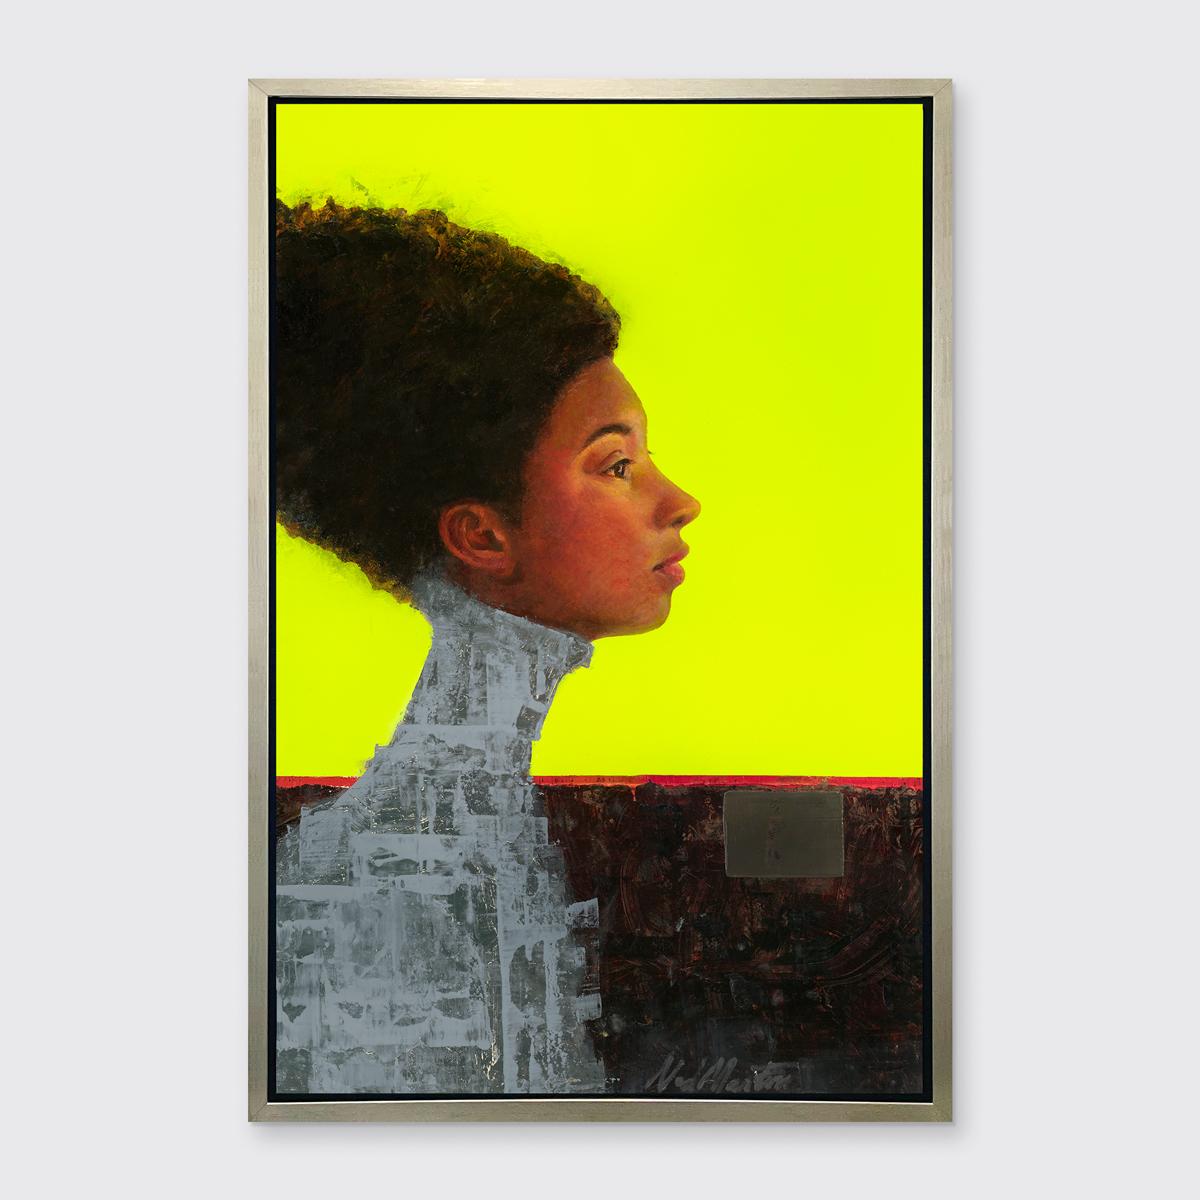 This limited edition print by Ned Martin is a contemporary abstract portrait. Part of his Spirits Through Time series, it features a woman in profile - her face and hair are rendered realistically while her neck and shoulders, and the background of